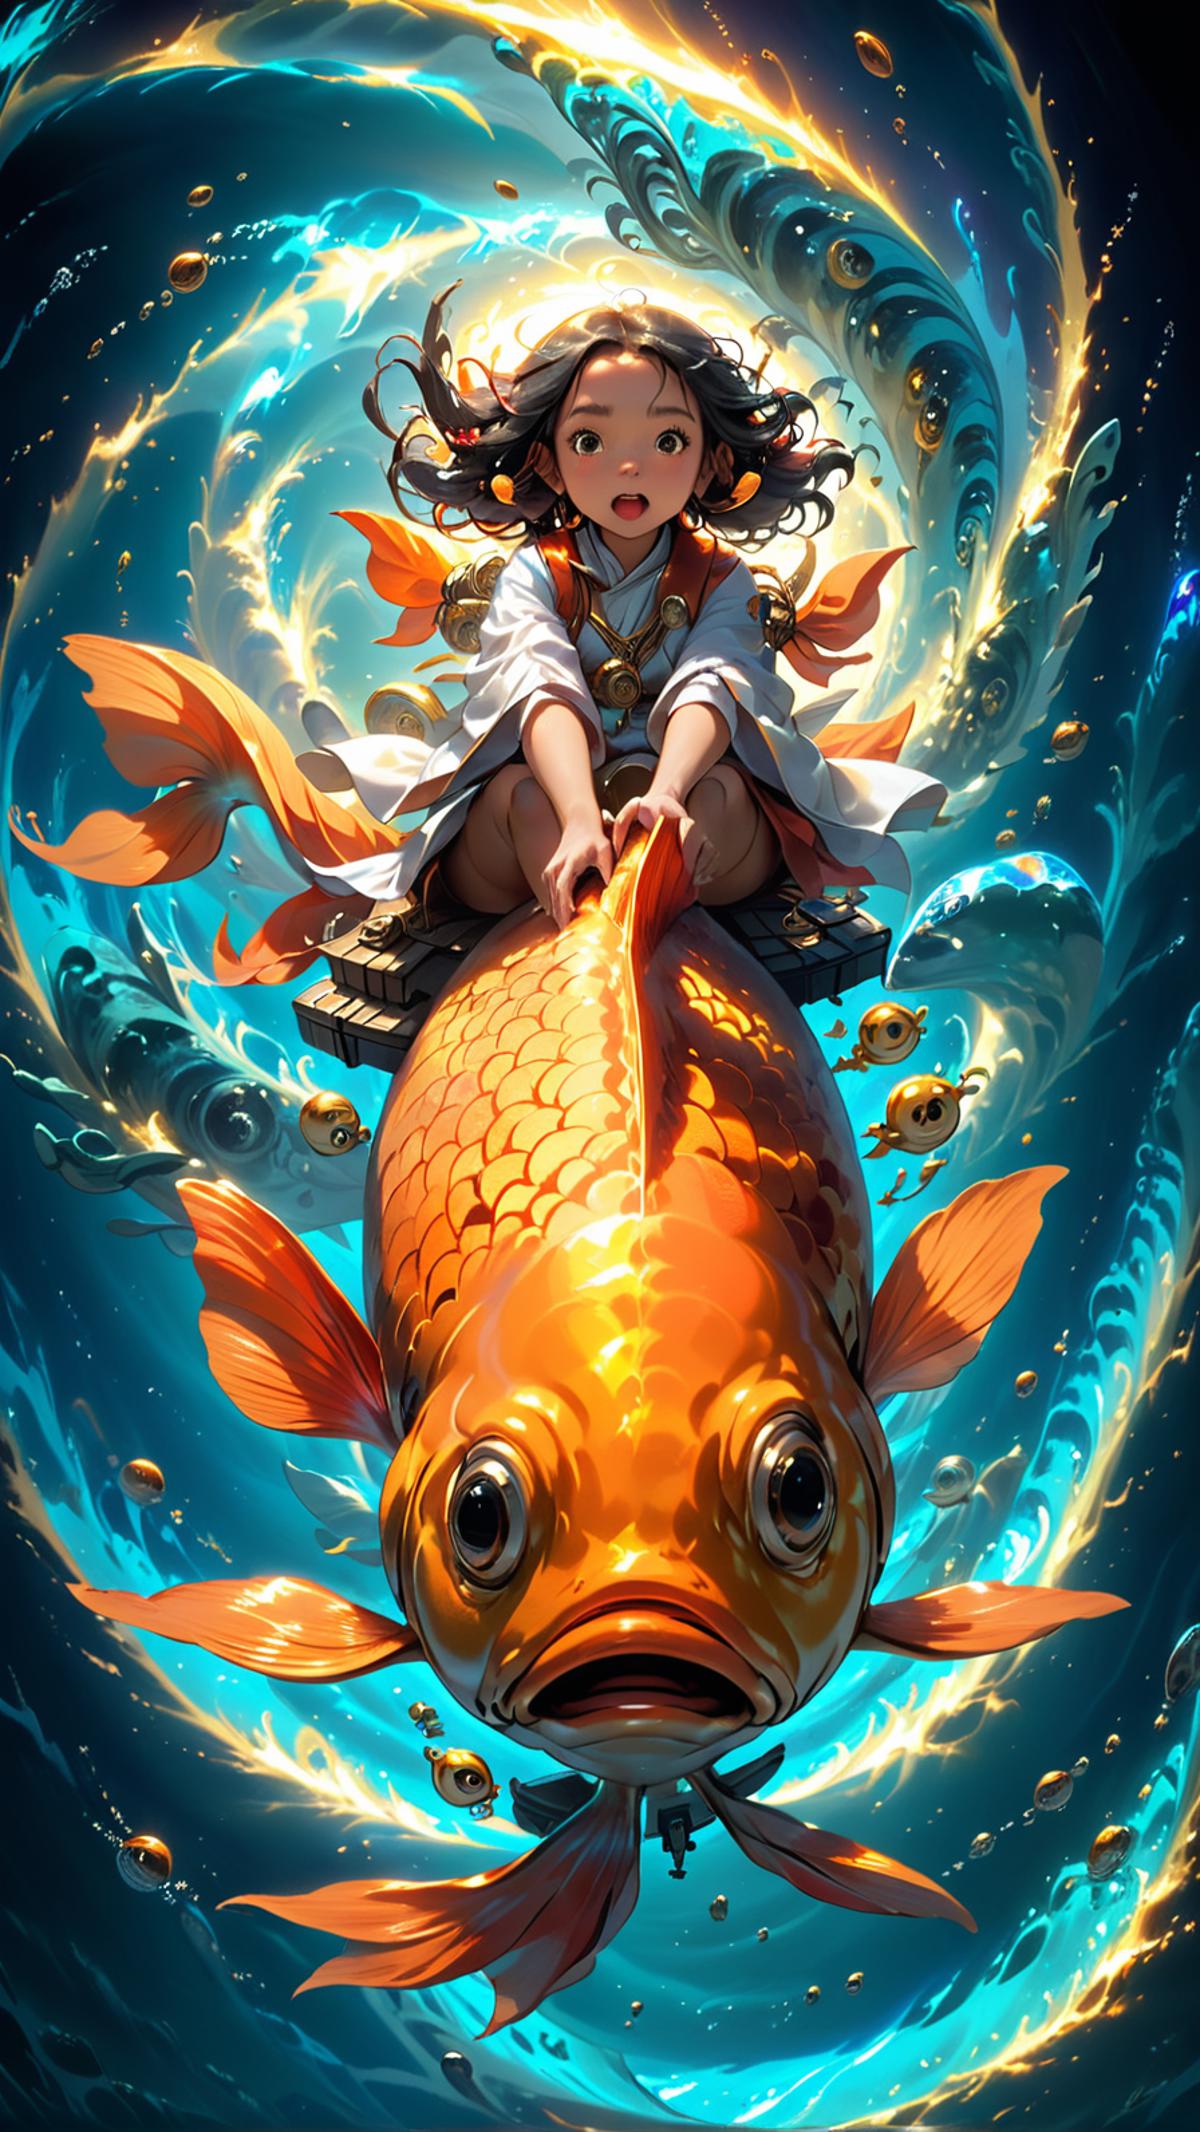 A young girl riding a magical goldfish in a blue ocean under the sky.